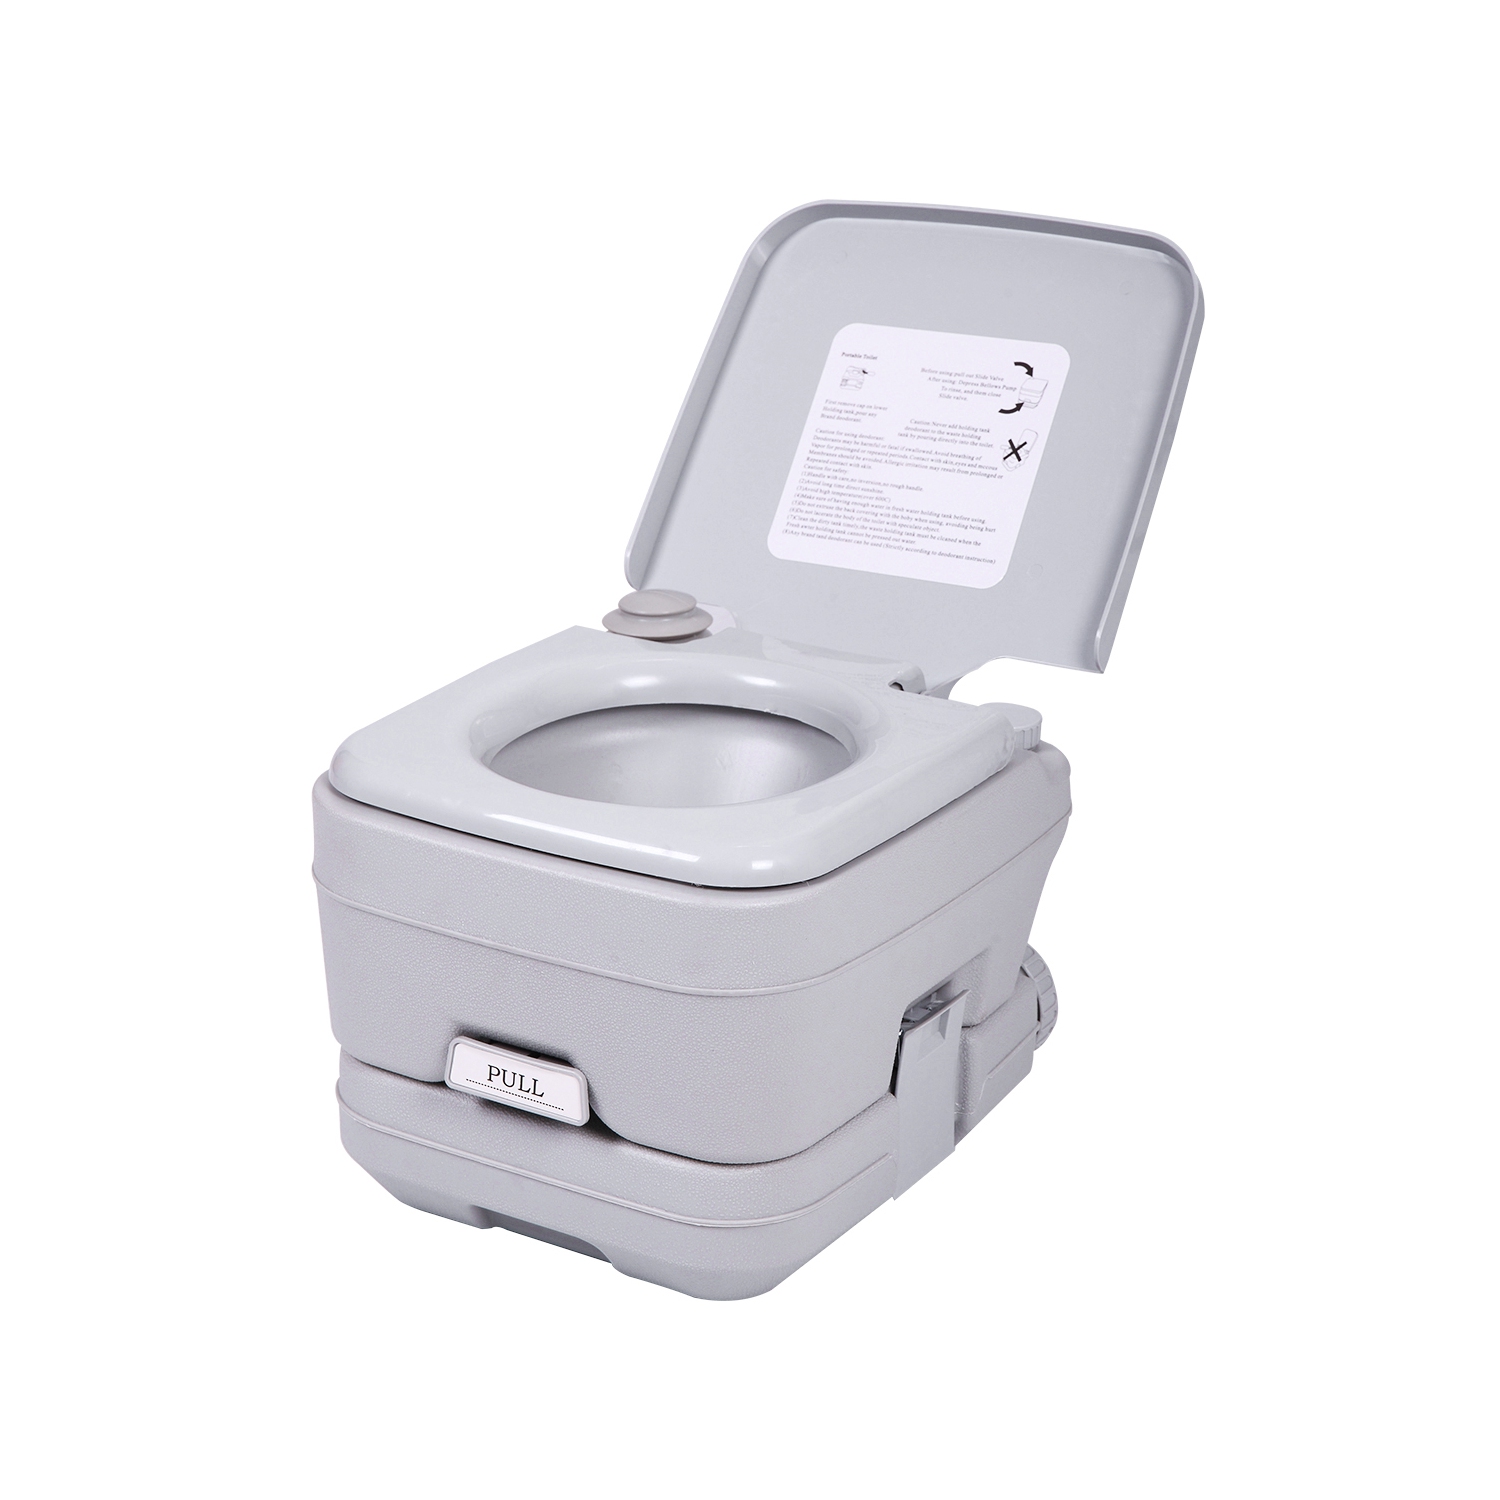 Sandinrayli 2.8 Gallon Portable Toilet Portable Potty for Travel Camping & Elderly Indoor Use